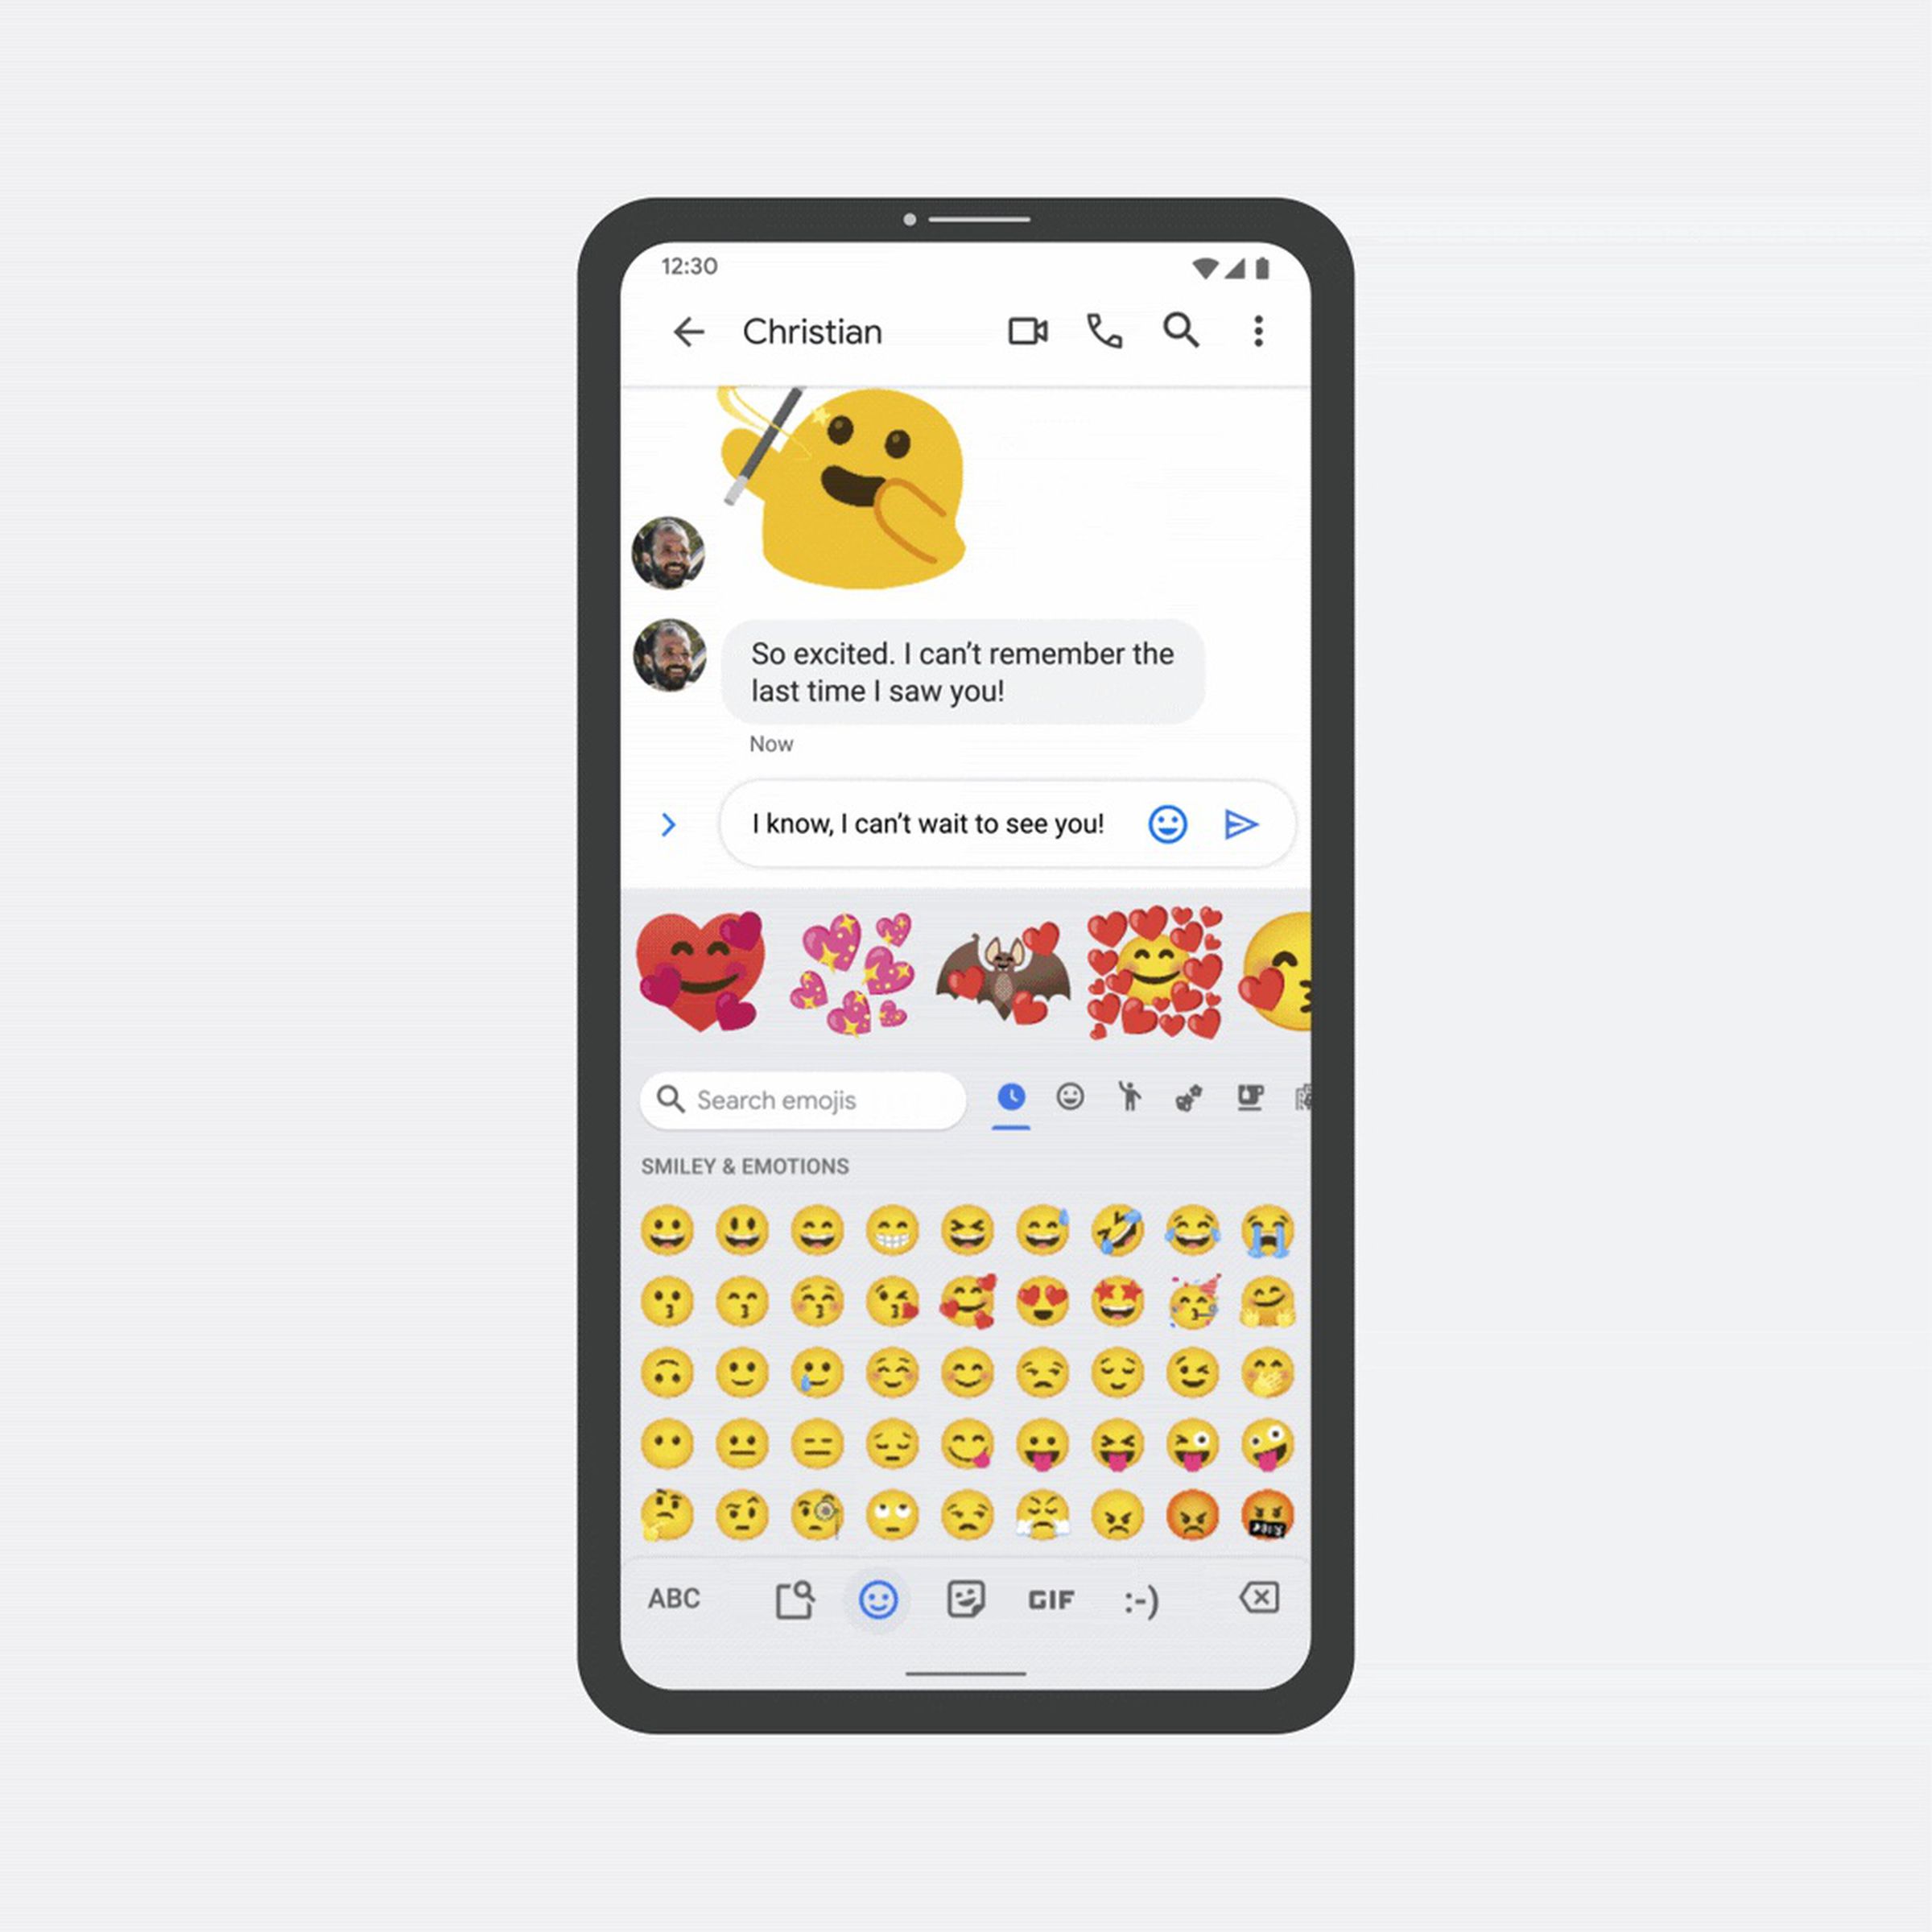 Gboard will suggest your custom emoji creations based on your message.